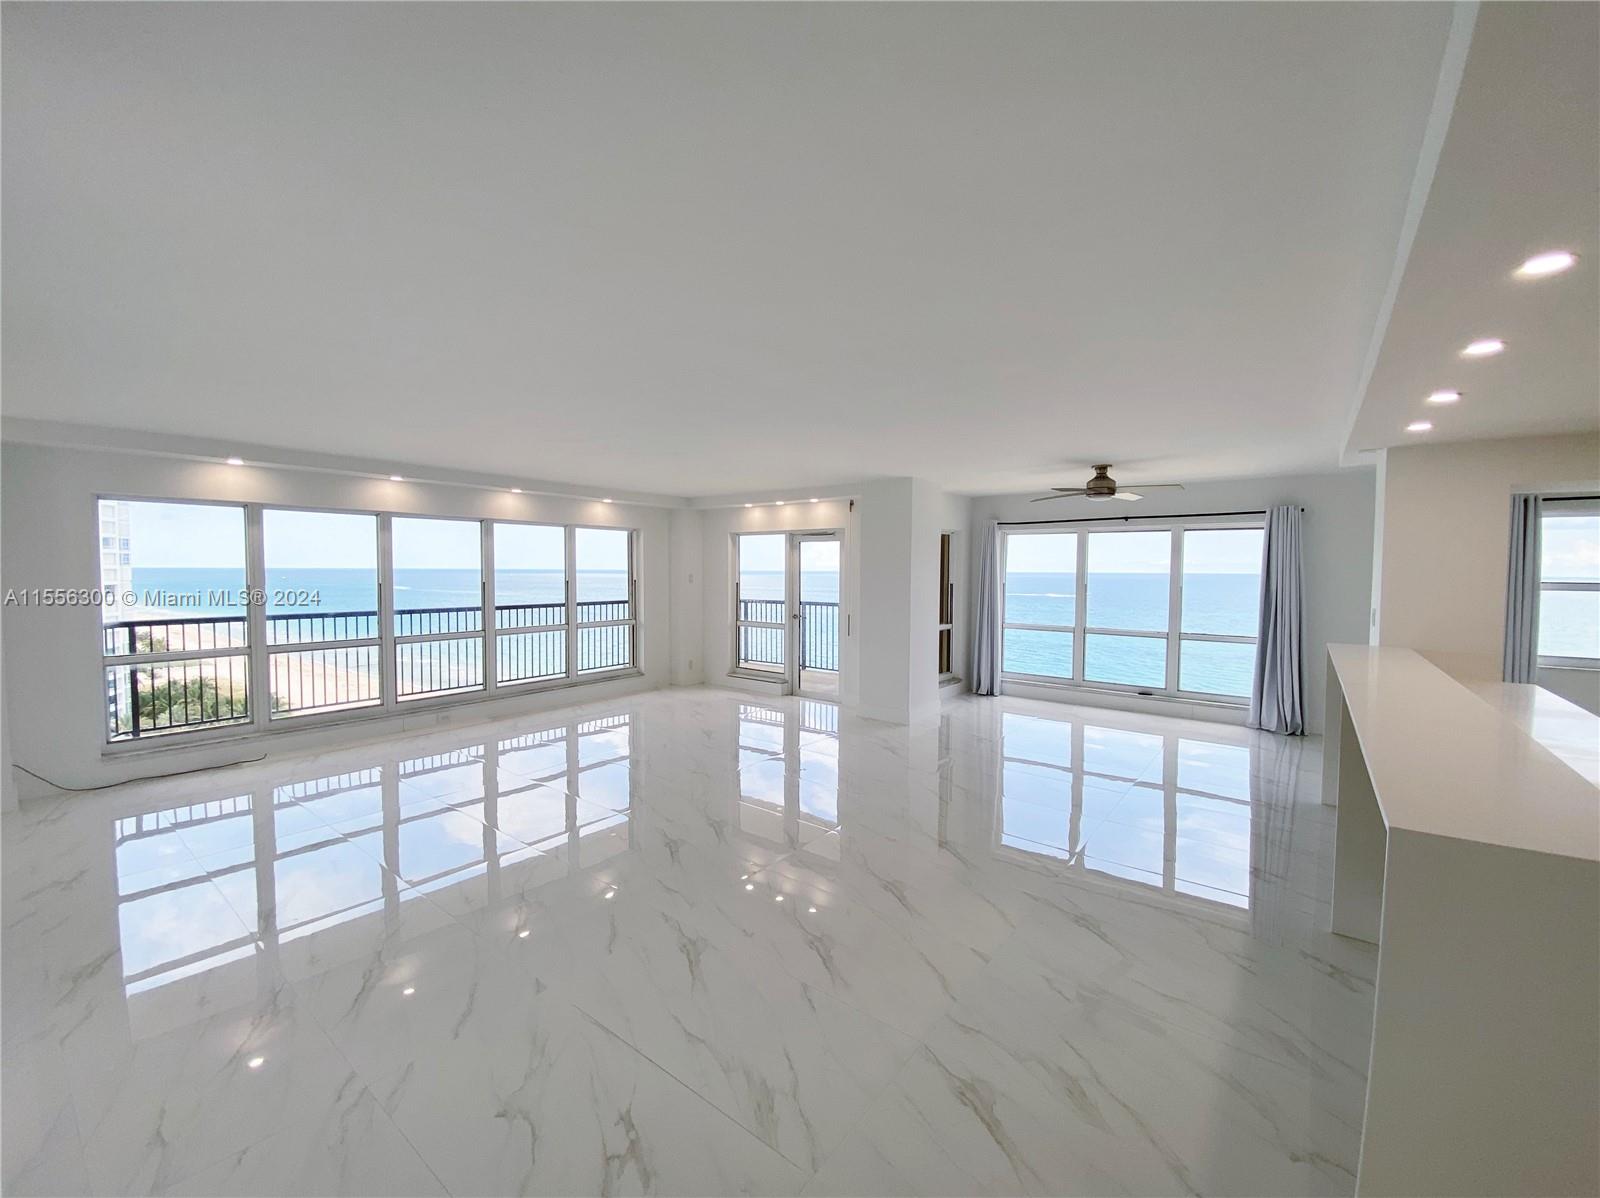 Spectacular, DIRECT OCEANFRONT, Sub Penthouse Condo in The Hampton Beach Club! RARELY AVAILABLE, 3 Bed/2.5 Bath with OCEAN VIEWS from ALL rooms! COMPLETELY REMODELED: 24x48 Porcelain Tile throughout, Diemme Cucine Italian kitchen w/Quartz Countertops, Italian Style Bathroom Cabinetry, LED Lighting & Custom Doors throughout. 2 BALCONIES! with breathtaking, panoramic, unobstructed ocean views! NE exposure, Separate Laundry Room, Lots of Natural Light & Pet Friendly! MOVE IN READY! Amenities include Private Beach Access, 24/7 Concierge-Security, Heated Pool, Tennis/Pickleball Courts, BBQ Areas, Gym, Assigned & Guest Parking, Storage + so much more! Minutes from Commercial and Atlantic Piers, Restaurants, Shops & Entertainment. Walking distance to several places of worship. Free City Shuttle!